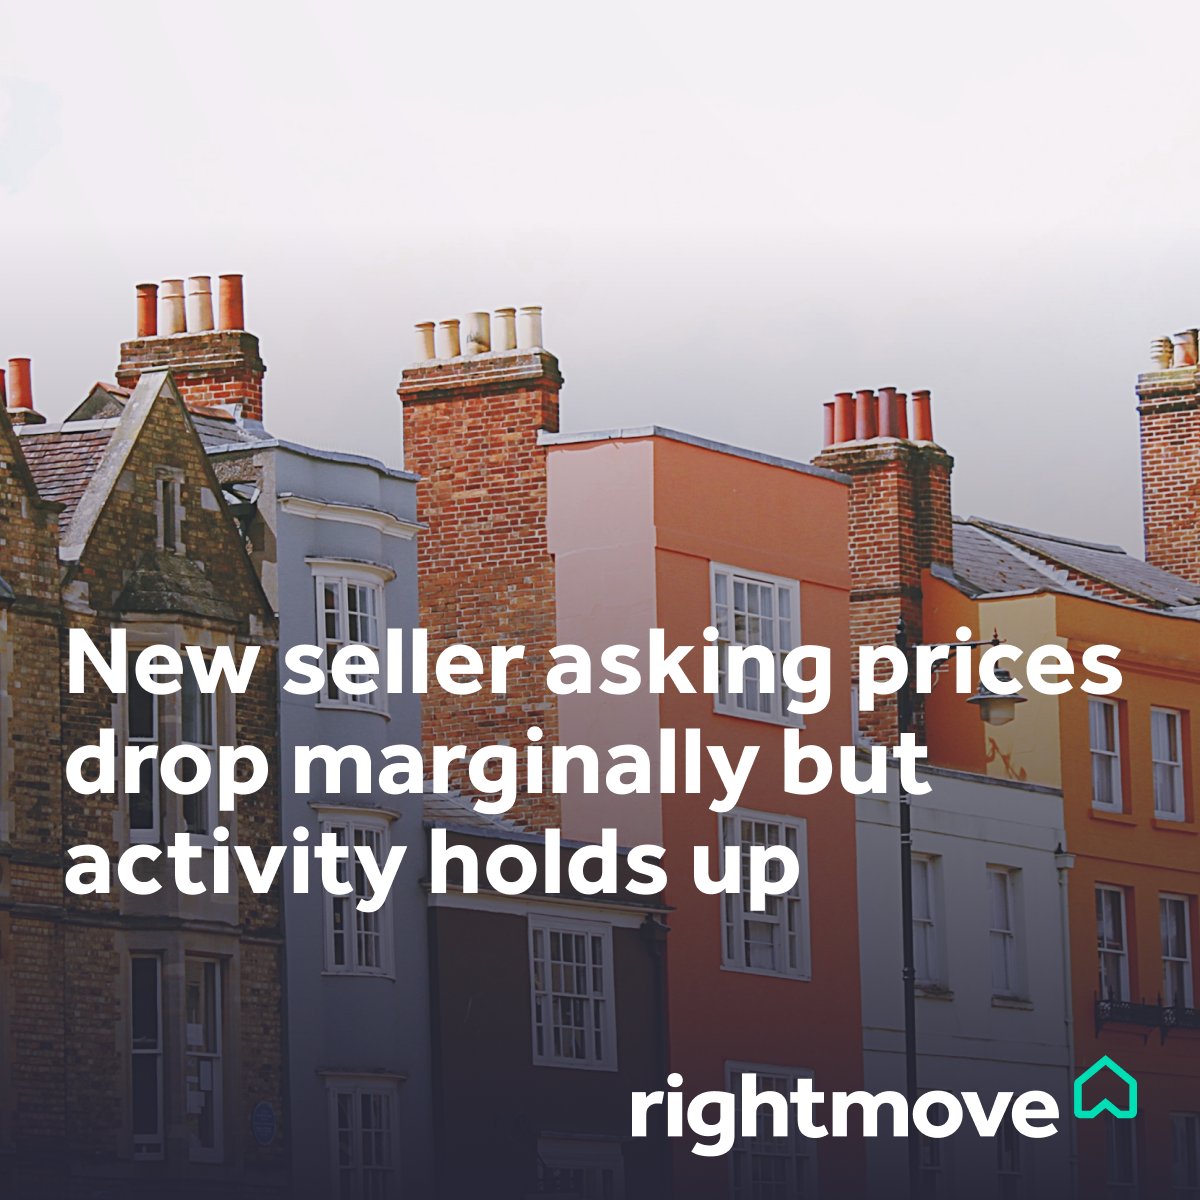 Rate rises quash spring price bounce but activity holds up. Learn more in our monthly House Price Report 👉 rebrand.ly/knrw7pc